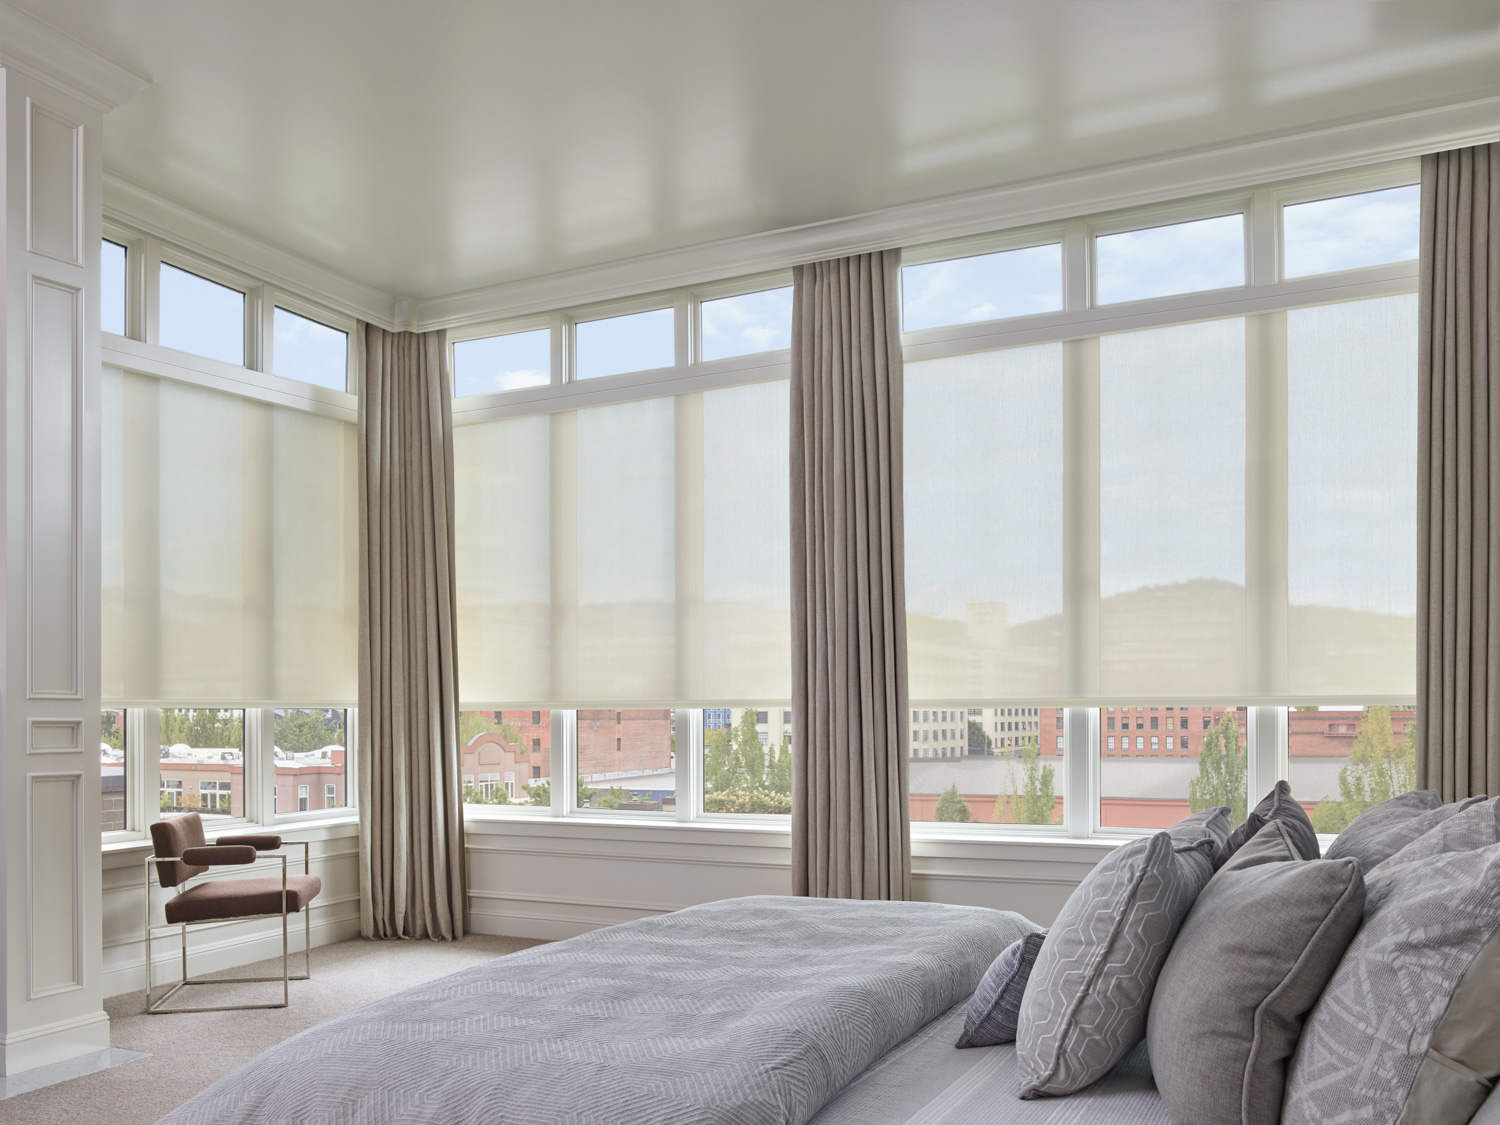 Designer Solar Shades by Hunter Douglas in a bedroom, providing stylish sun protection and privacy.